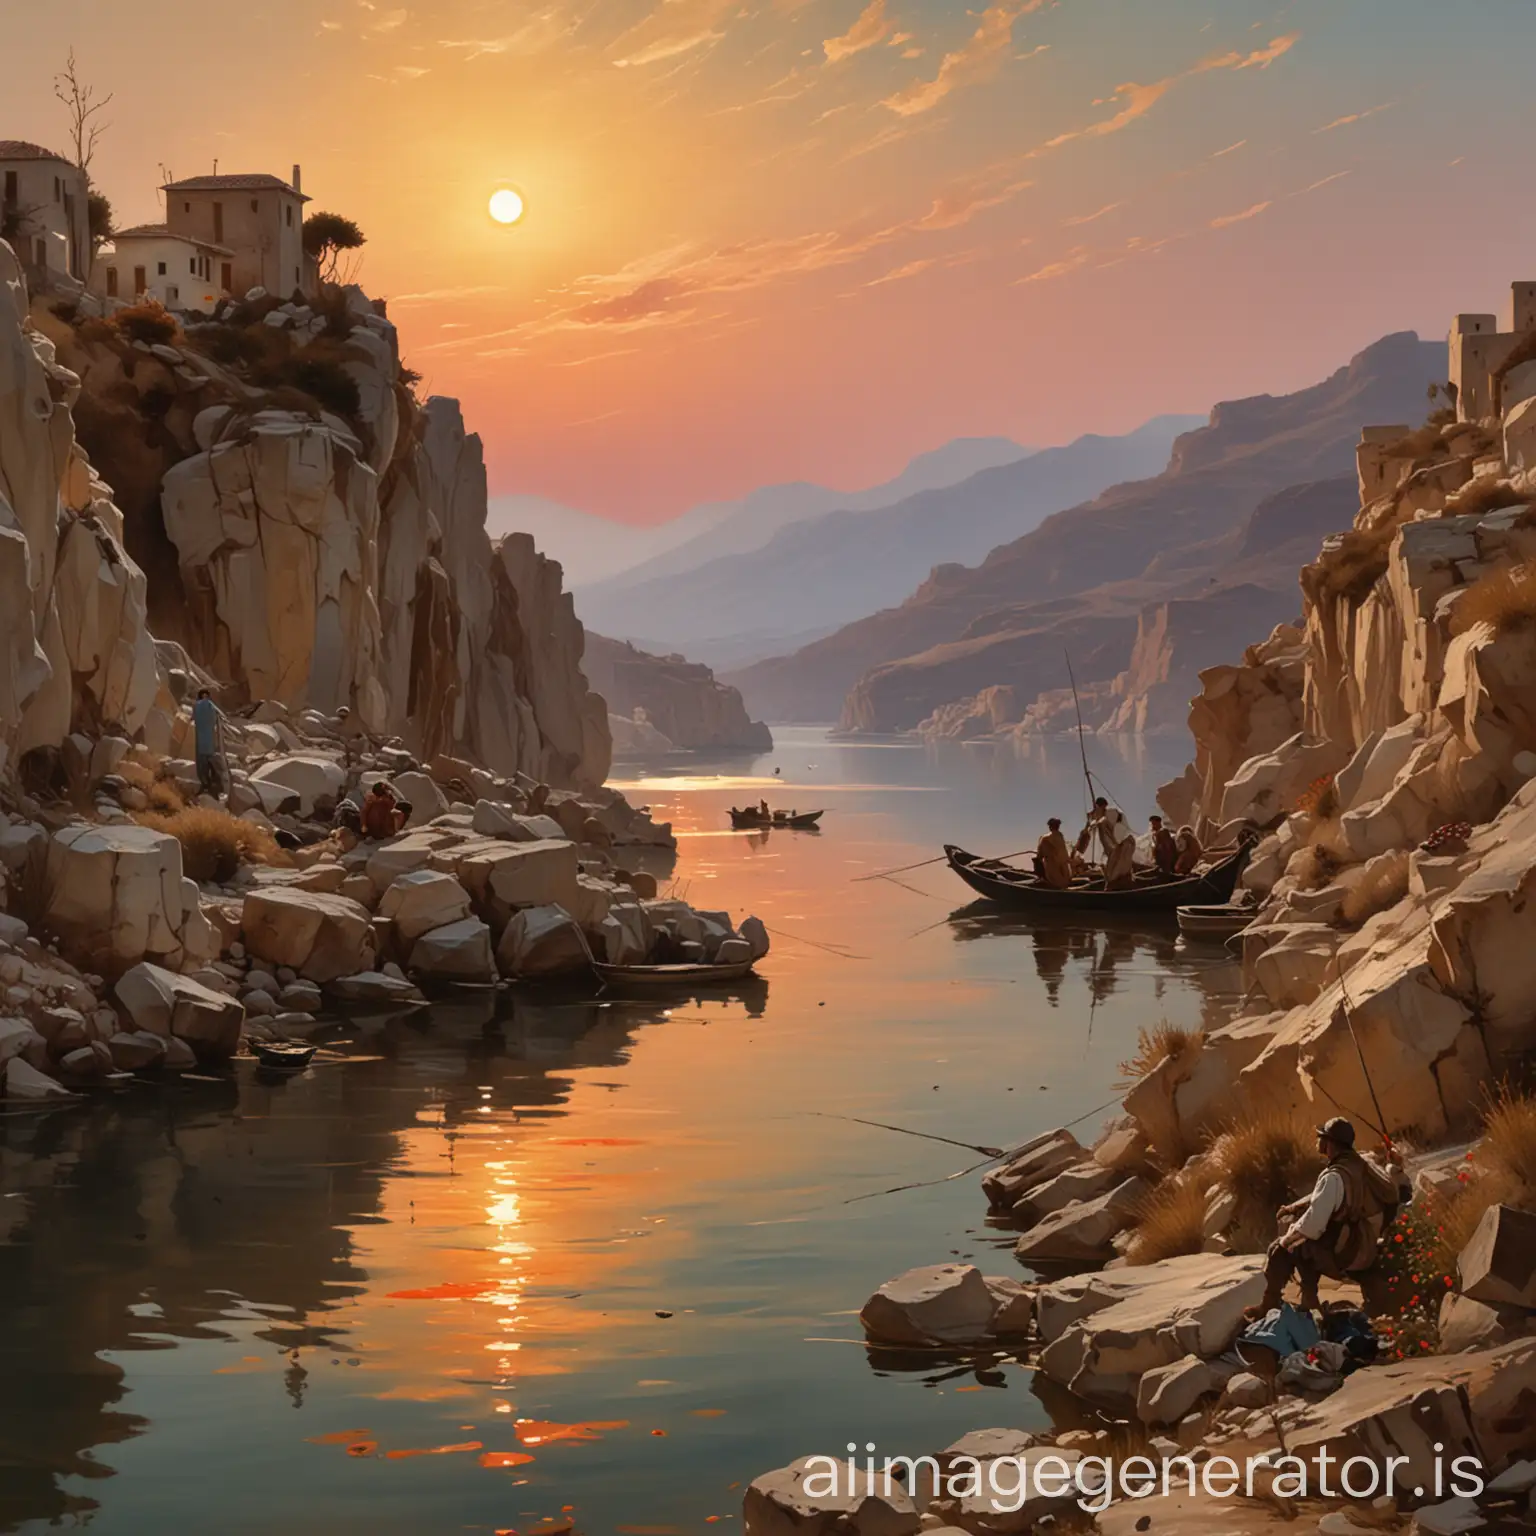 Dystopian-Greek-Landscape-with-Levitating-Fishermen-Inspired-by-John-Singer-Sargents-Painting